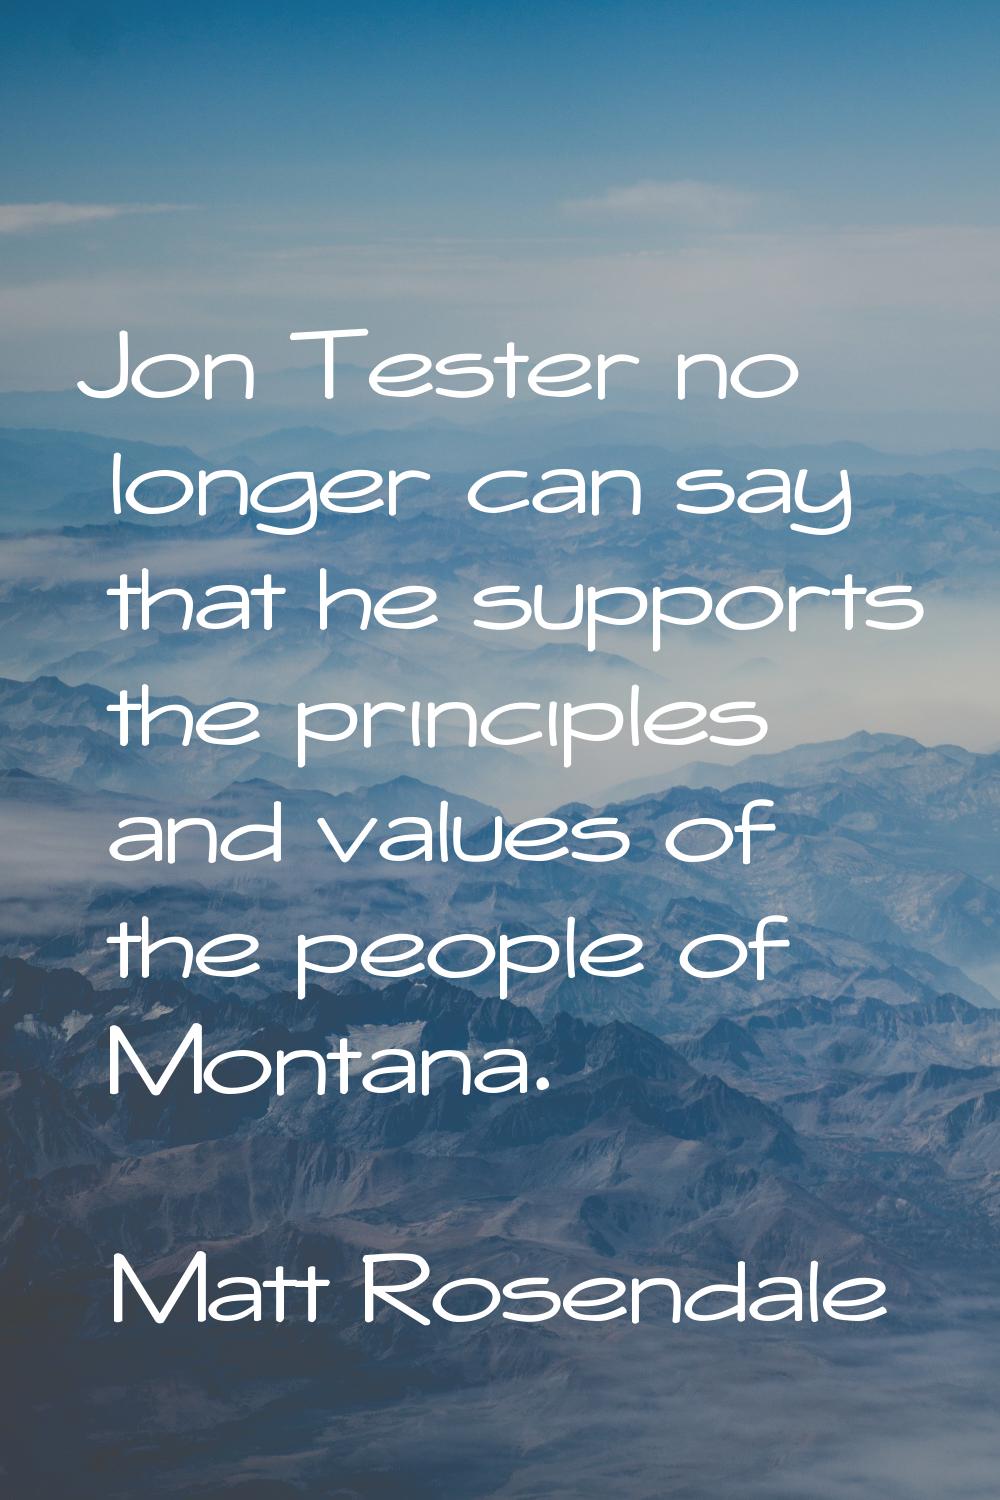 Jon Tester no longer can say that he supports the principles and values of the people of Montana.